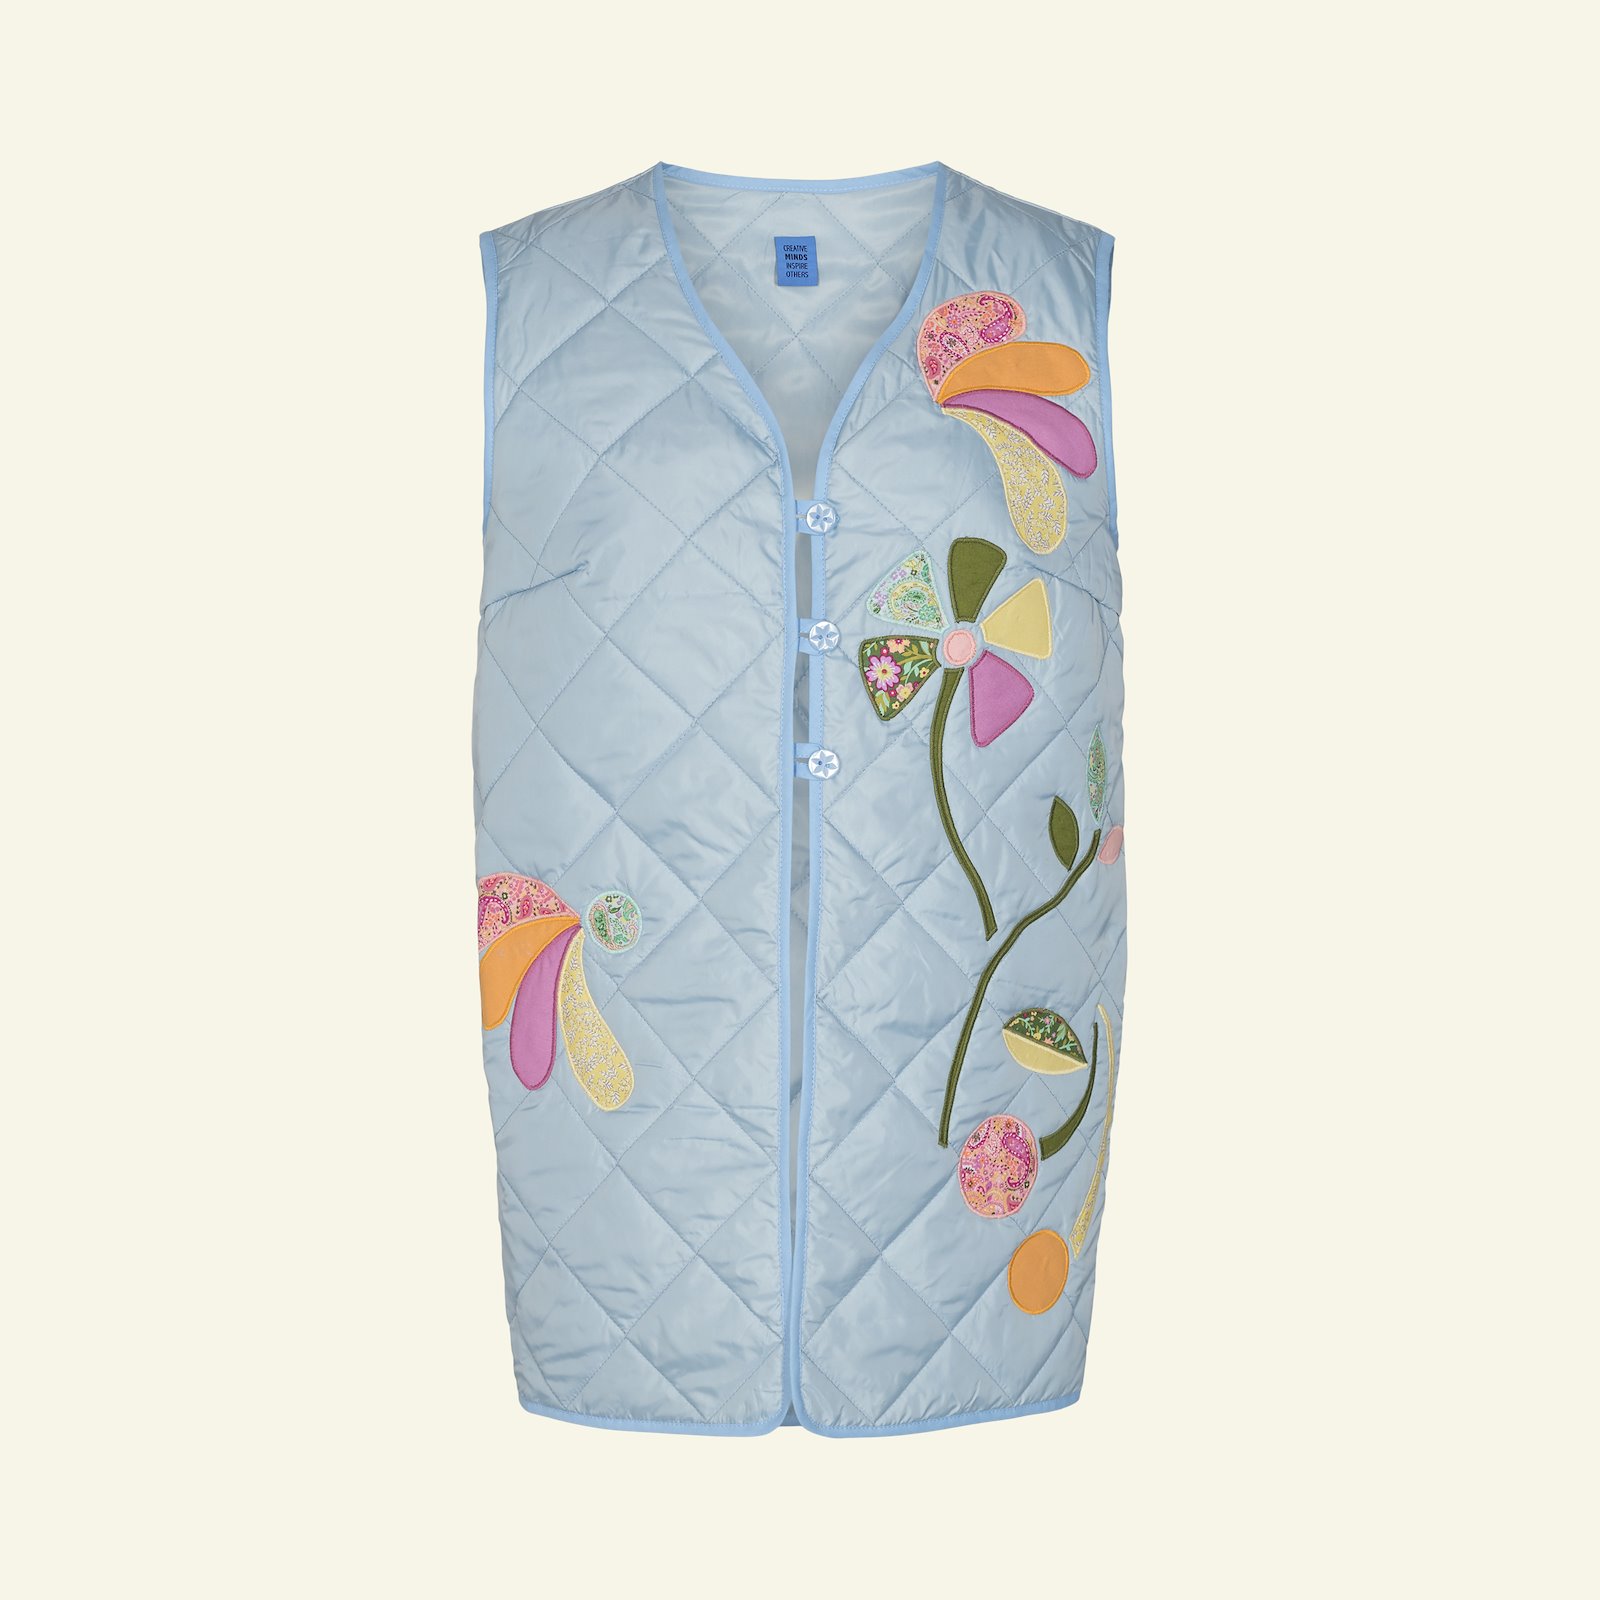 Quilted jacket and waistcoat, 40/12 p24047_920225_66019_33224_sskit